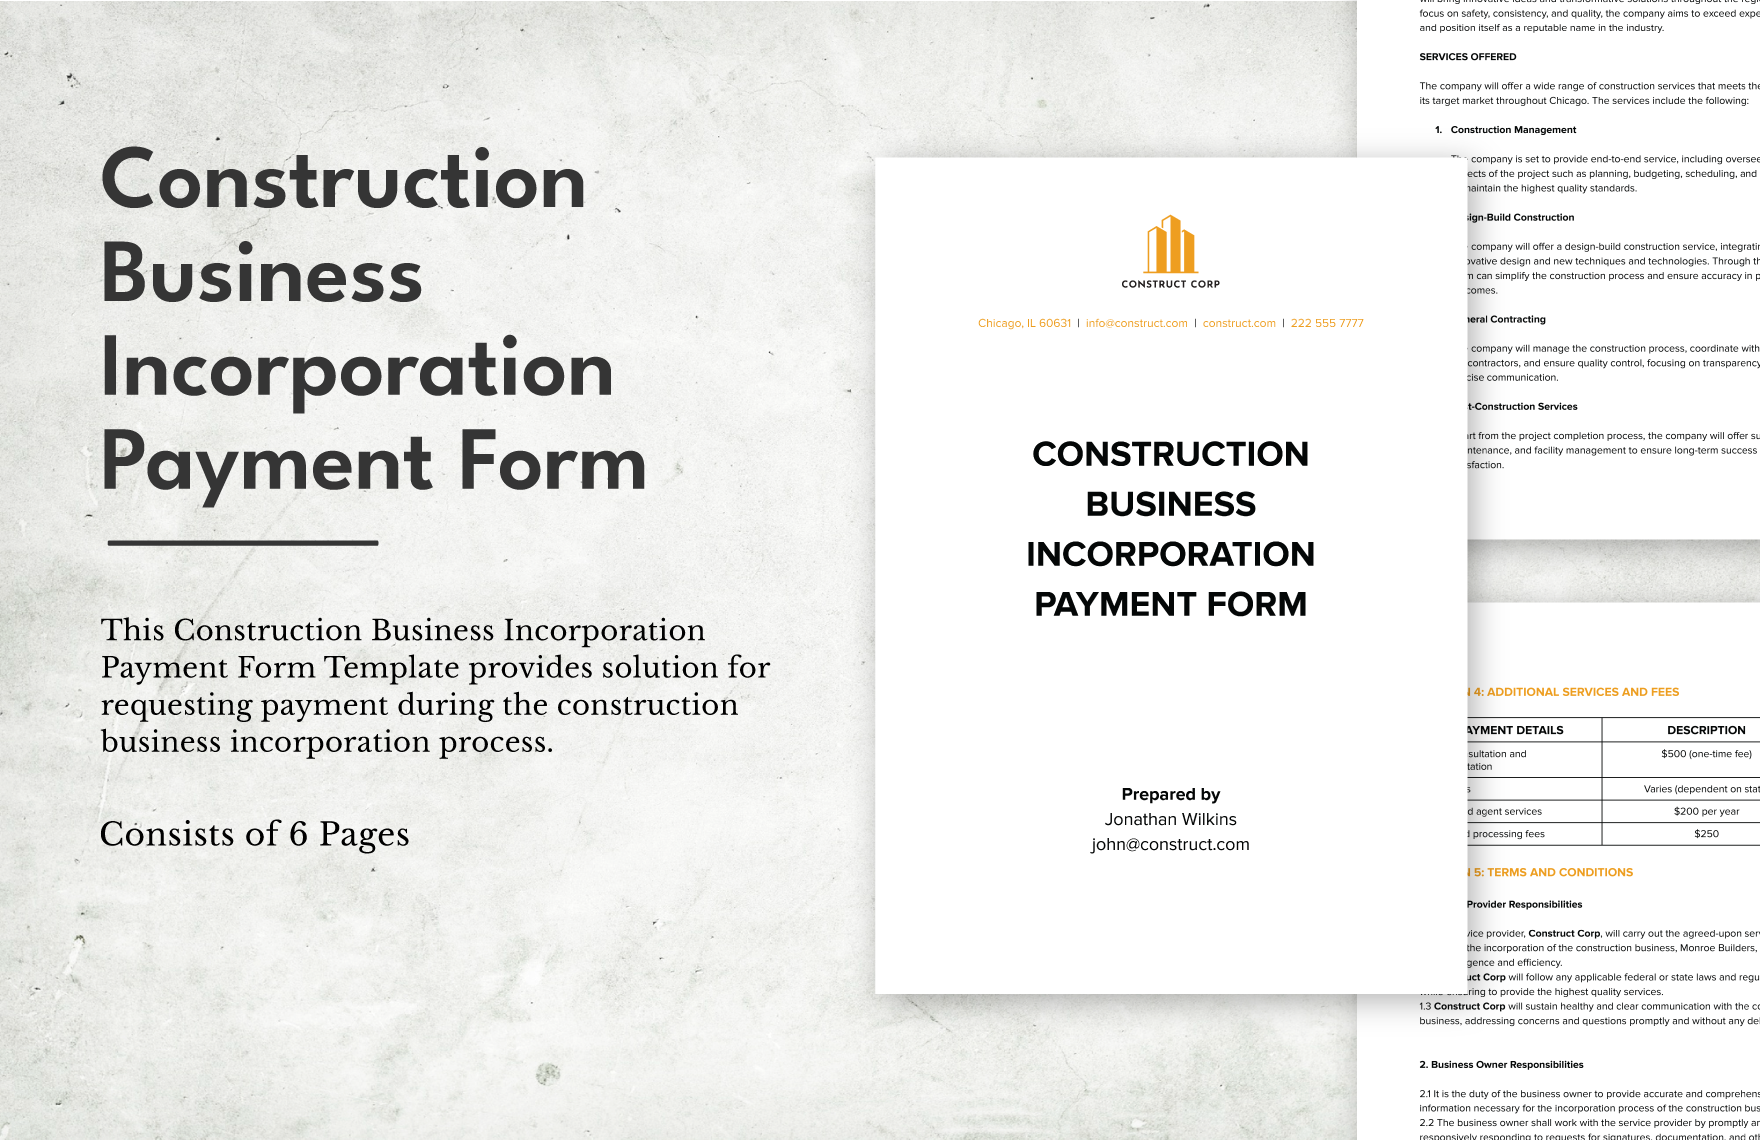 construction-business-incorporation-payment-form